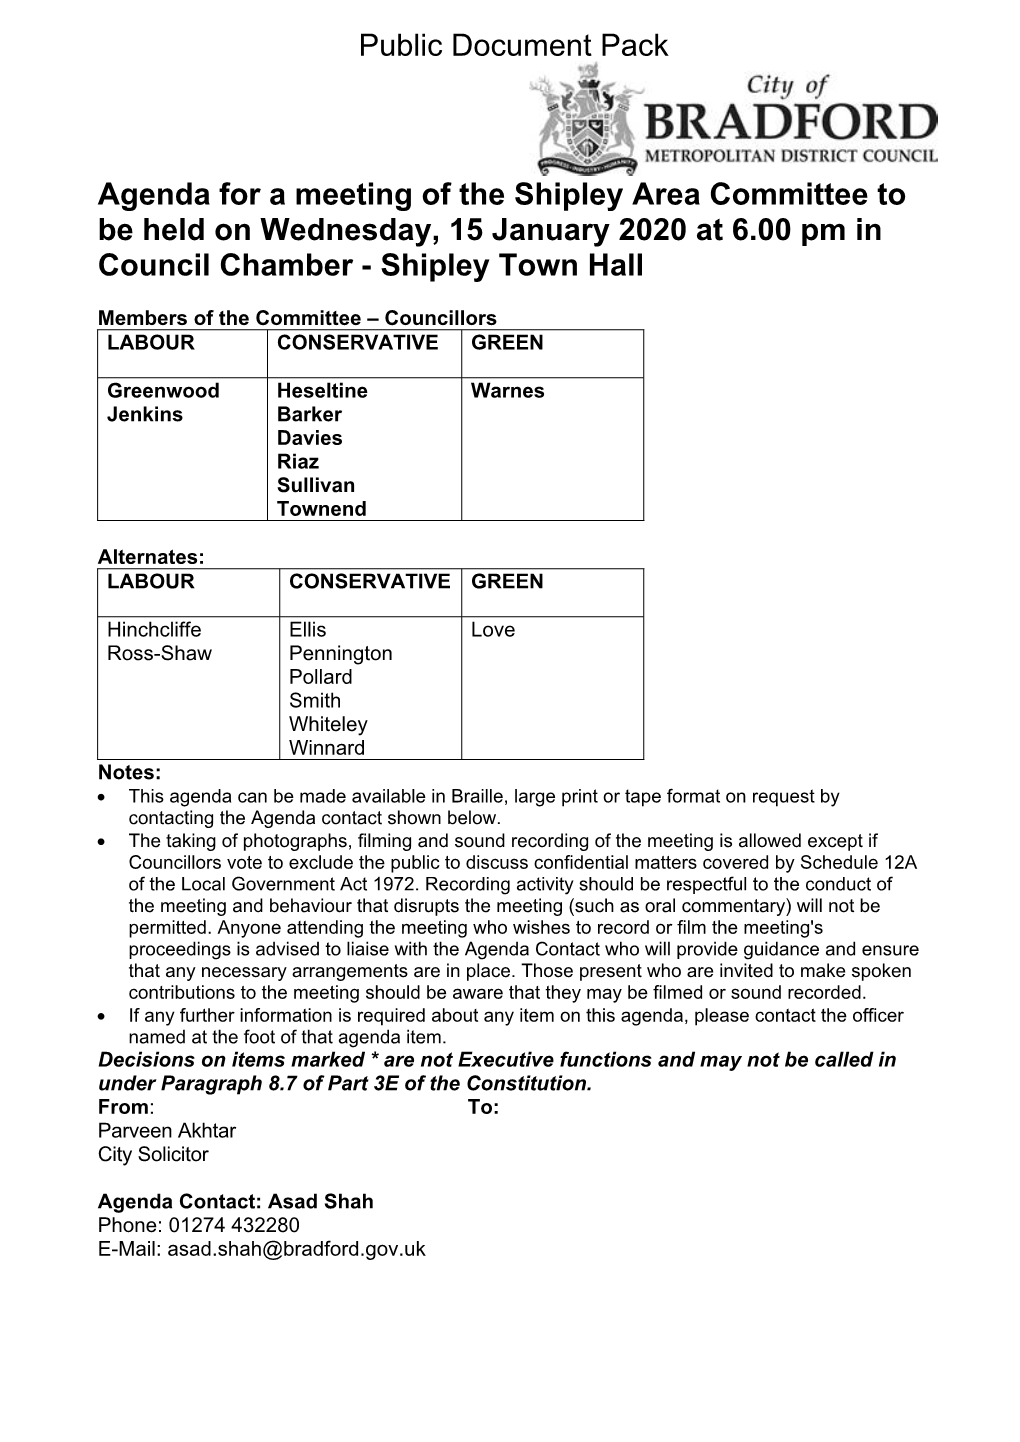 (Public Pack)Agenda Document for Shipley Area Committee, 15/01